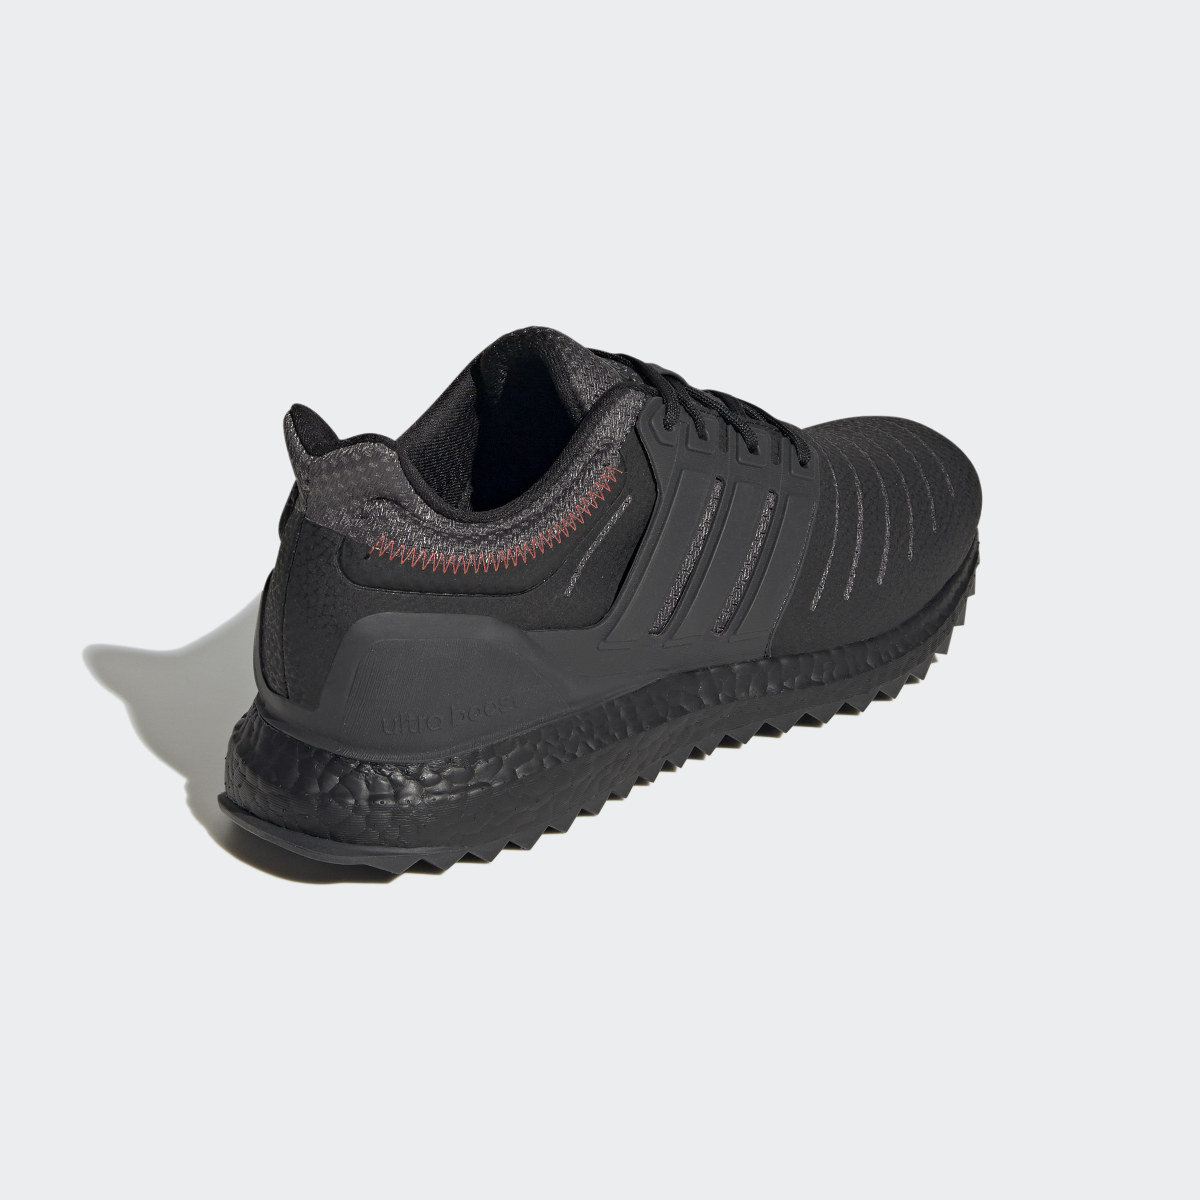 Adidas Ultraboost DNA XXII Lifestyle Running Sportswear Capsule Collection Shoes. 6